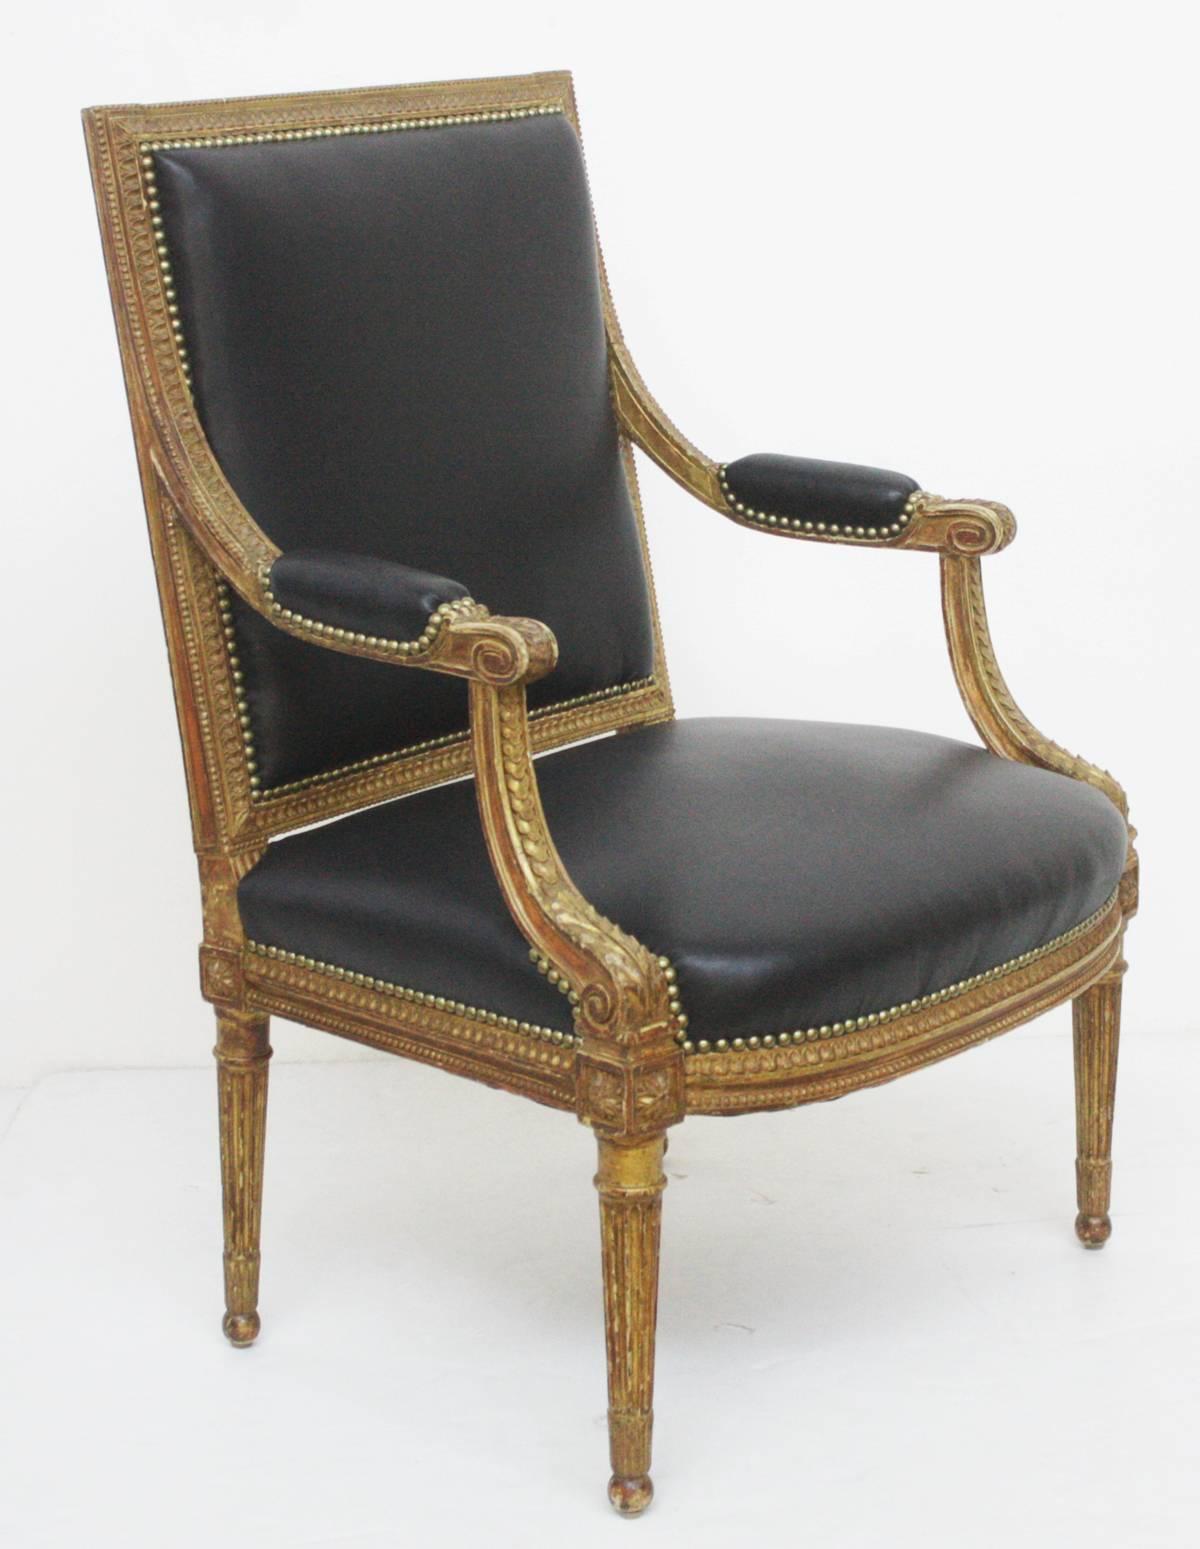 Group of four Louis XVI style giltwood fauteuils or armchairs with new black leather upholstery with nailhead trim

Available as two pairs $6,800.00 per pair.
One pair sold.